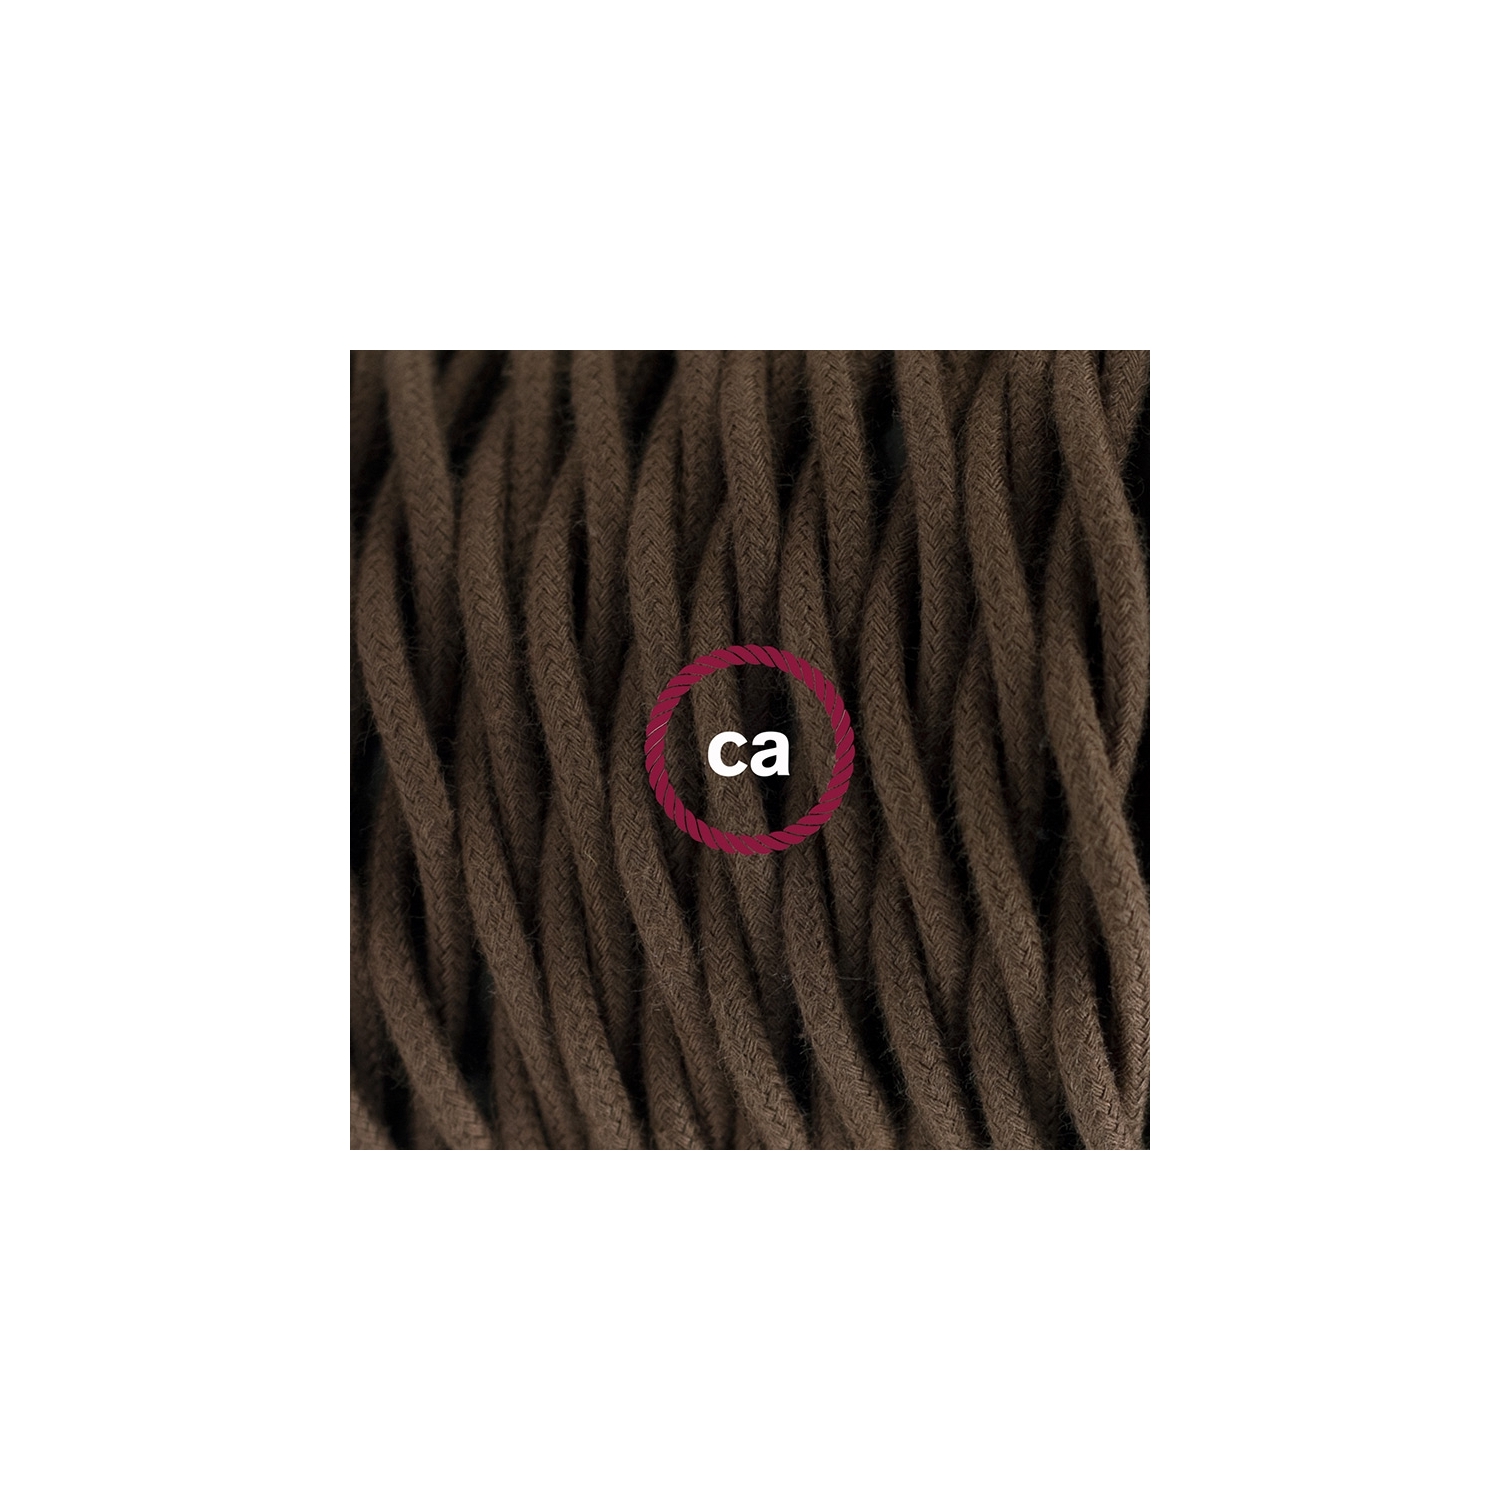 Create your TC13 Brown Cotton Snake and bring the light wherever you want.